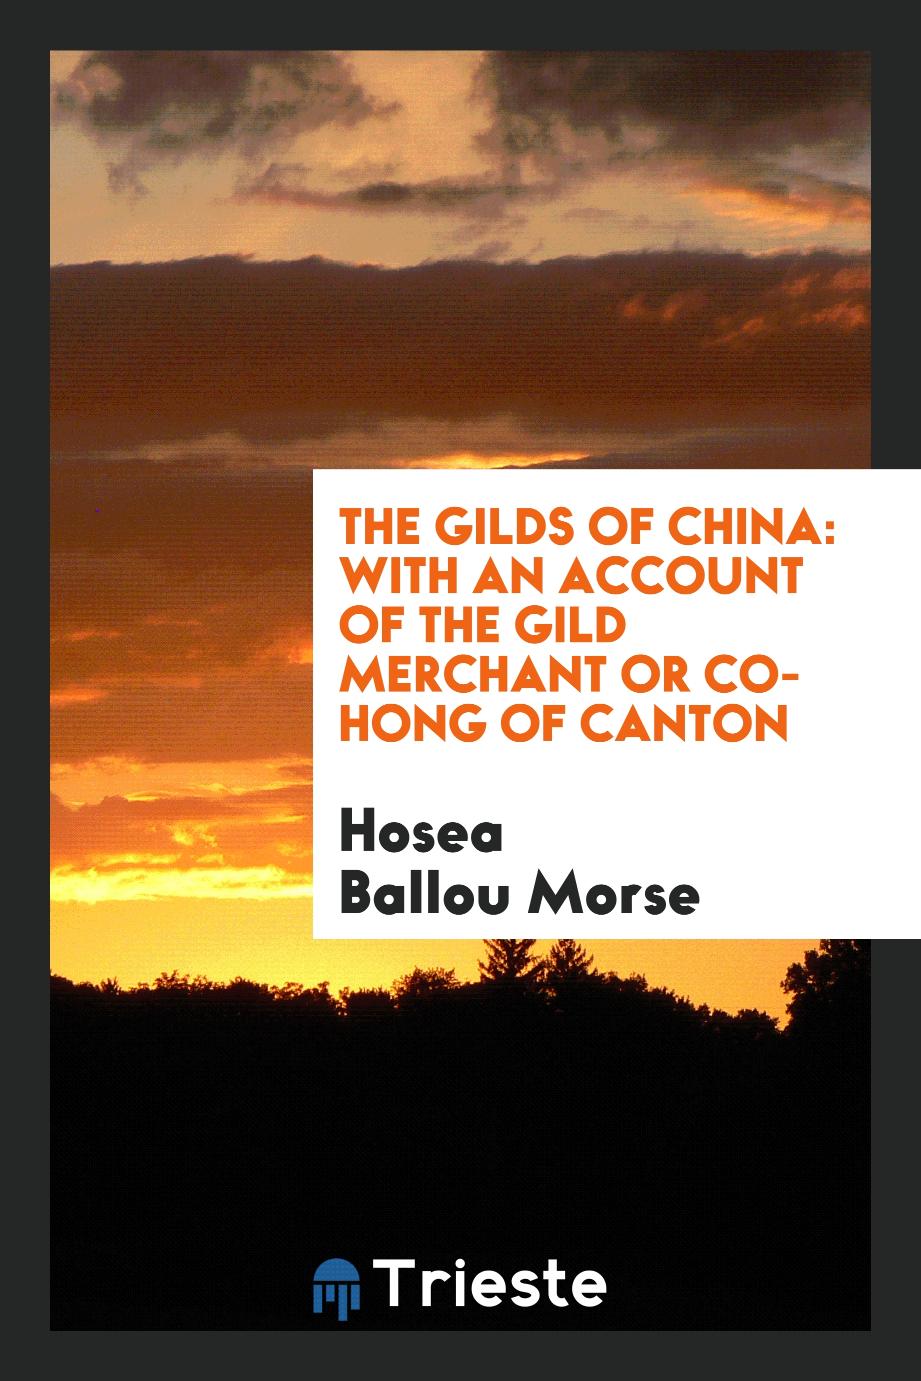 The Gilds of China: With an Account of the Gild Merchant Or Co-hong of Canton